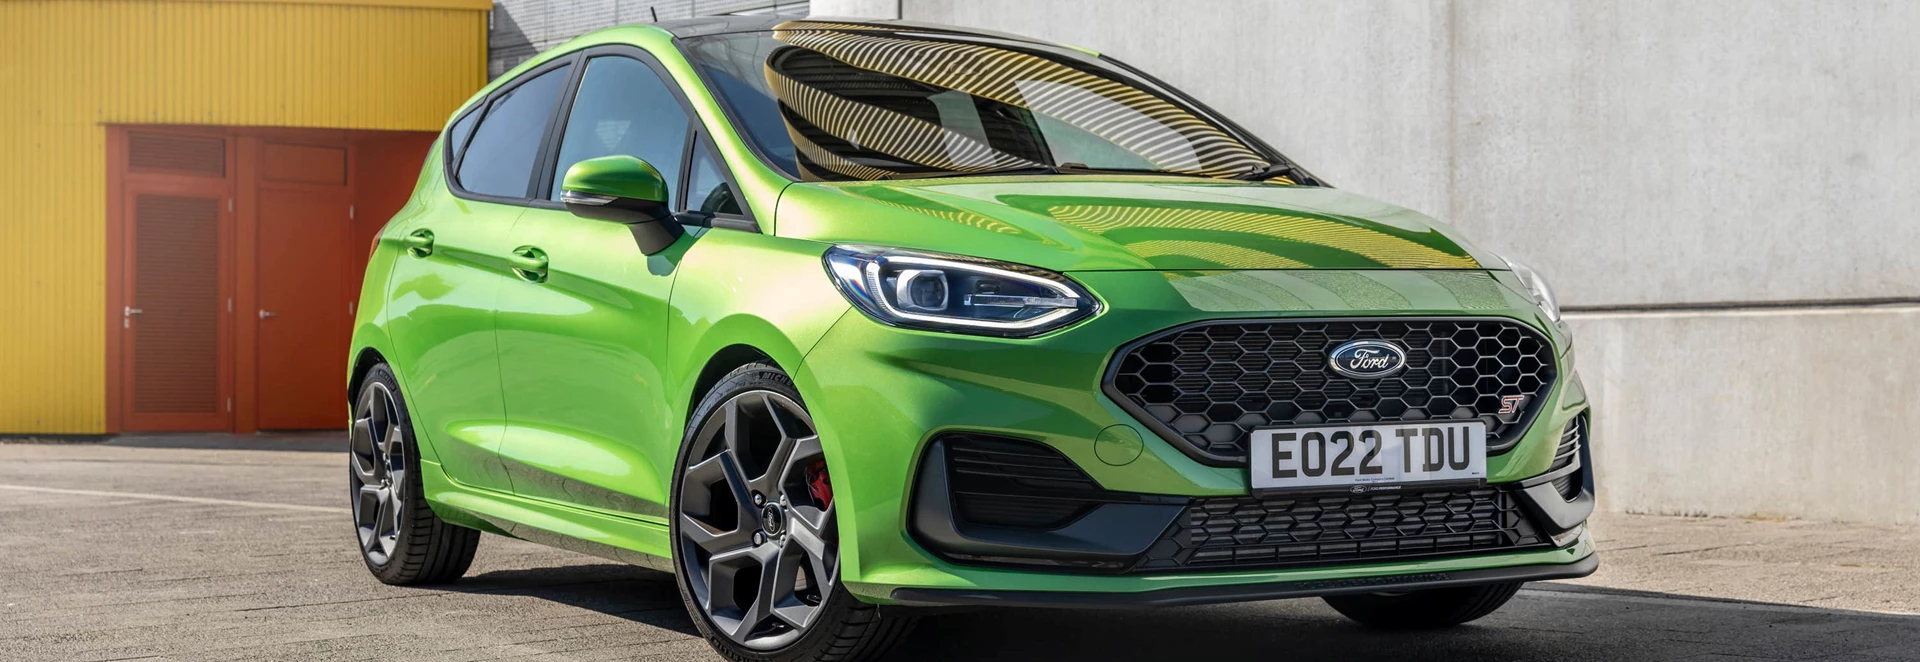 Ford Fiesta ST 2022 Review 